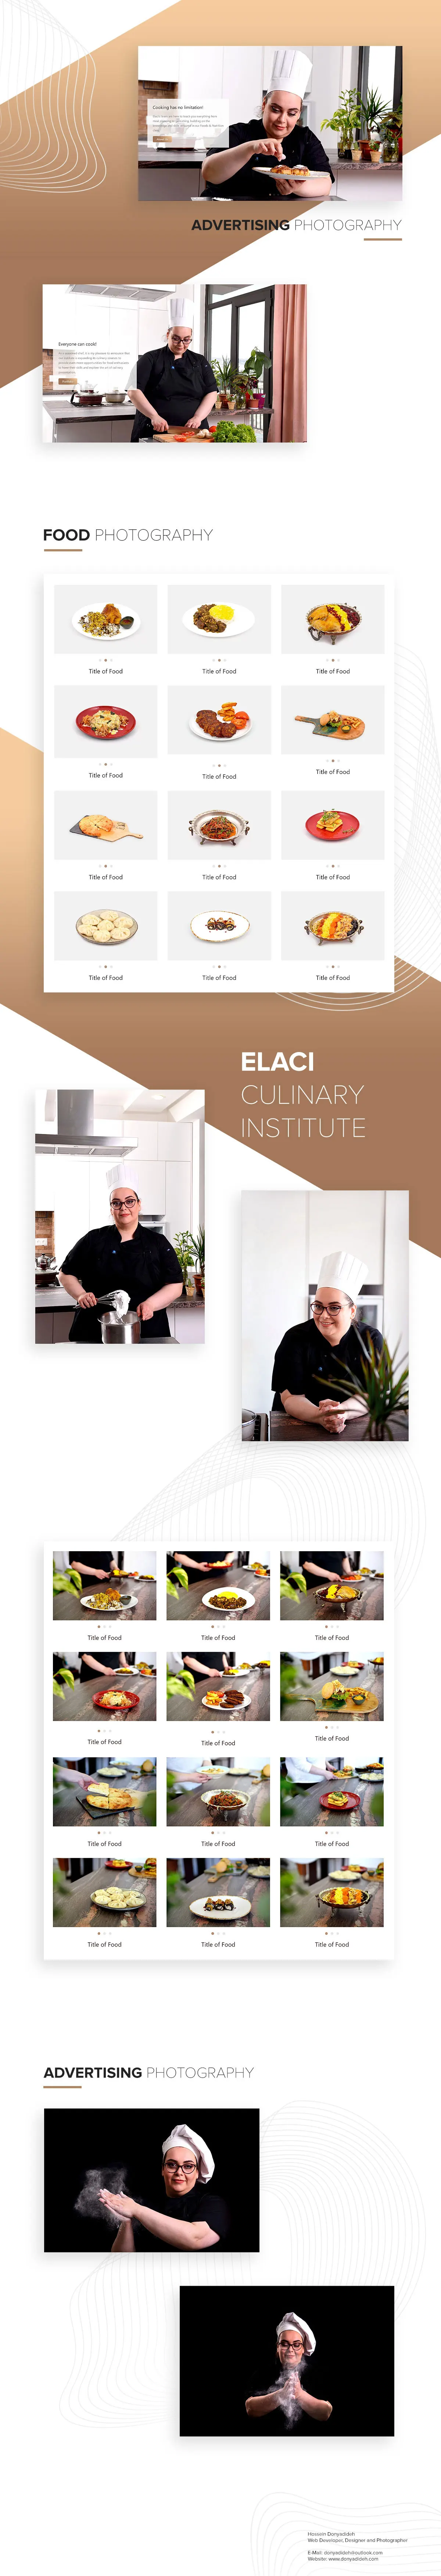 Elaci Culinary Institute Advertising Photography | Hossein Donyadideh